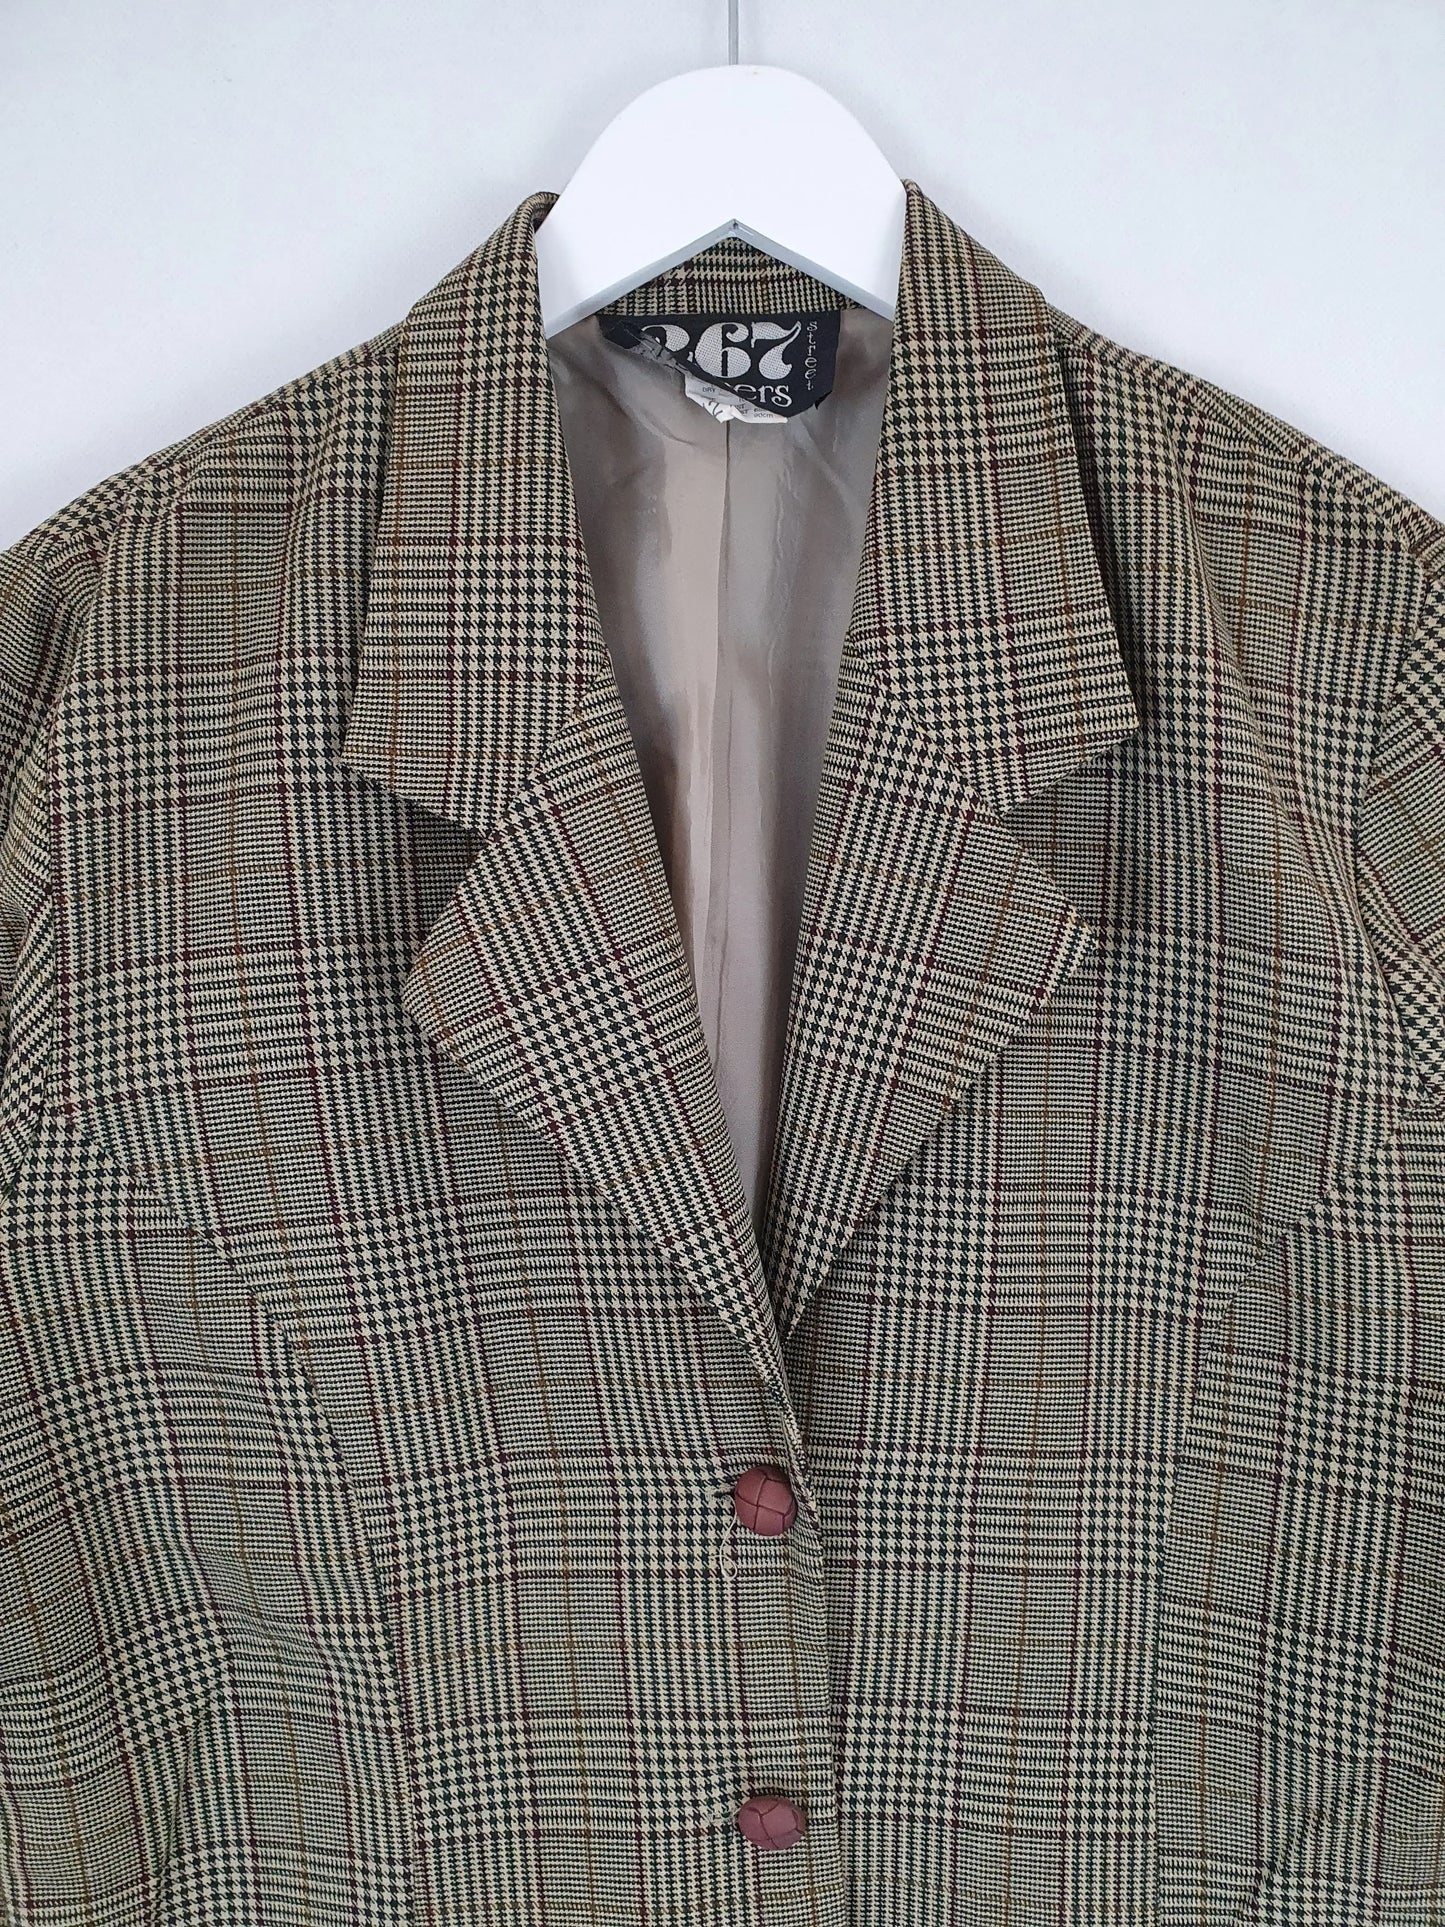 267 Chalmers Street Plaid Blazer Size 12 by SwapUp-Second Hand Shop-Thrift Store-Op Shop 